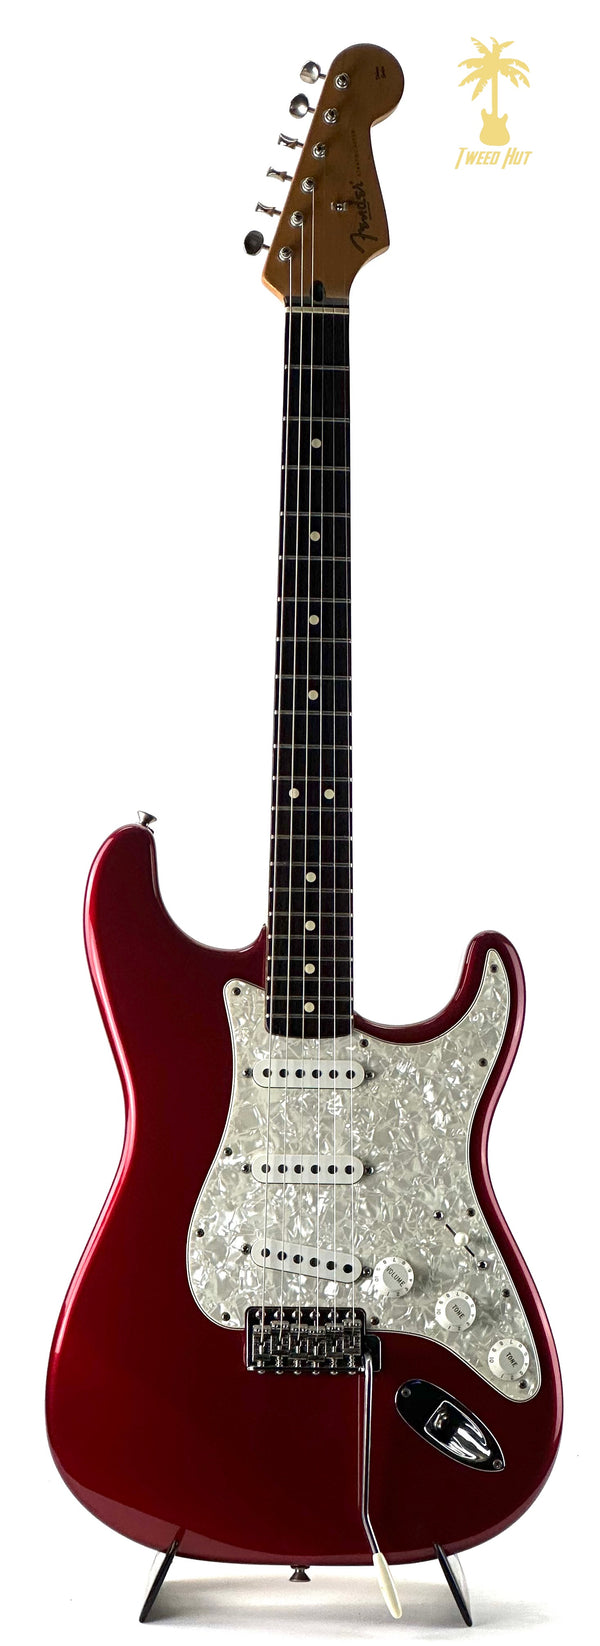 PRE-OWNED FENDER POWERHOUSE STRATOCASTER 2001 - CANDY APPLE RED